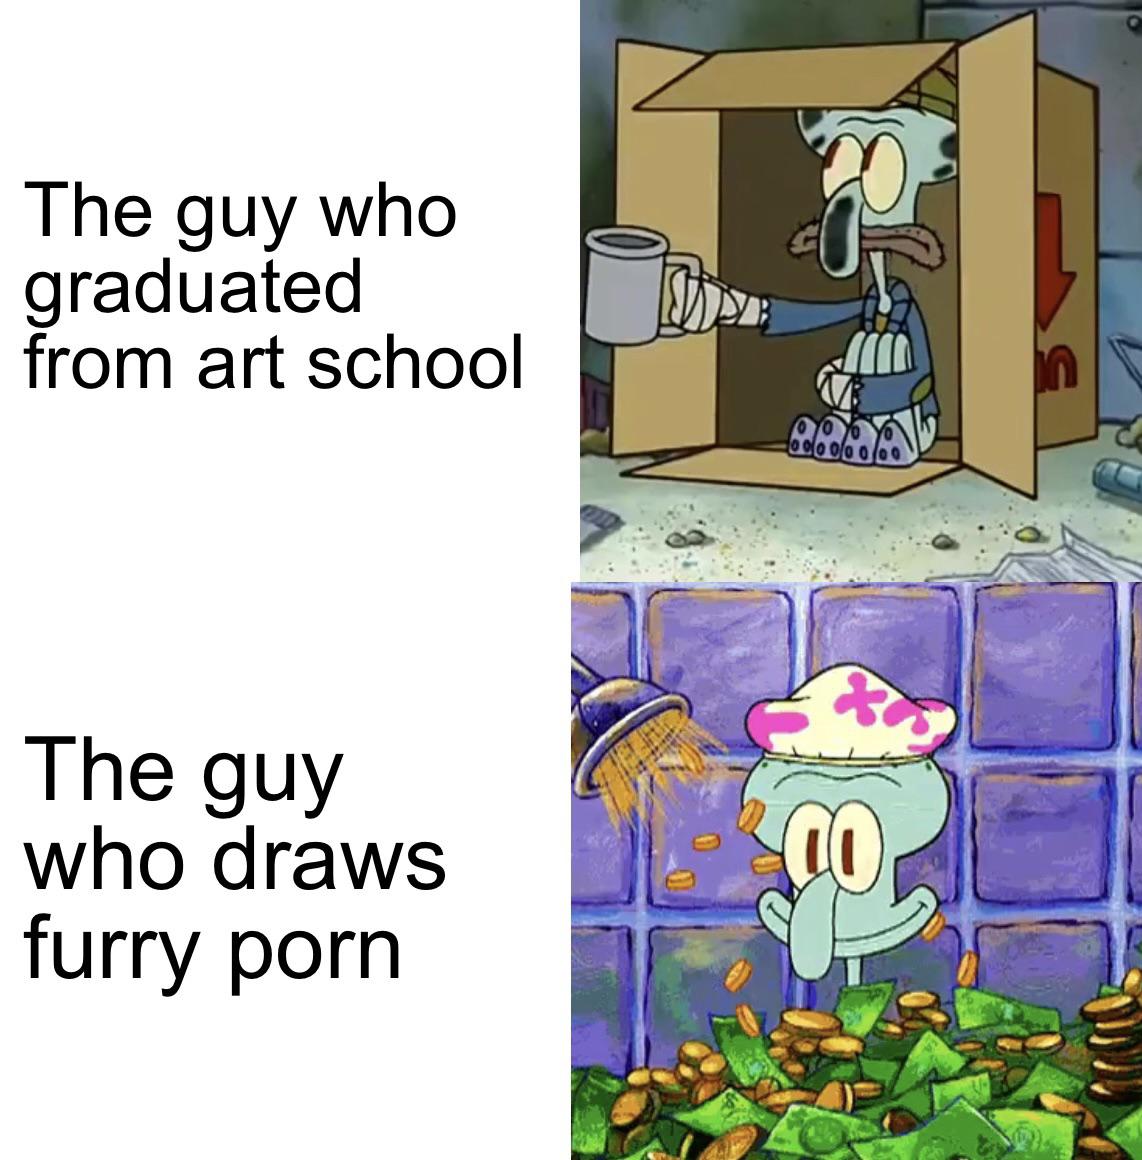 funny memes - Mr. Krabs - The guy who graduated from art school The guy who draws furry porn 0000000 del